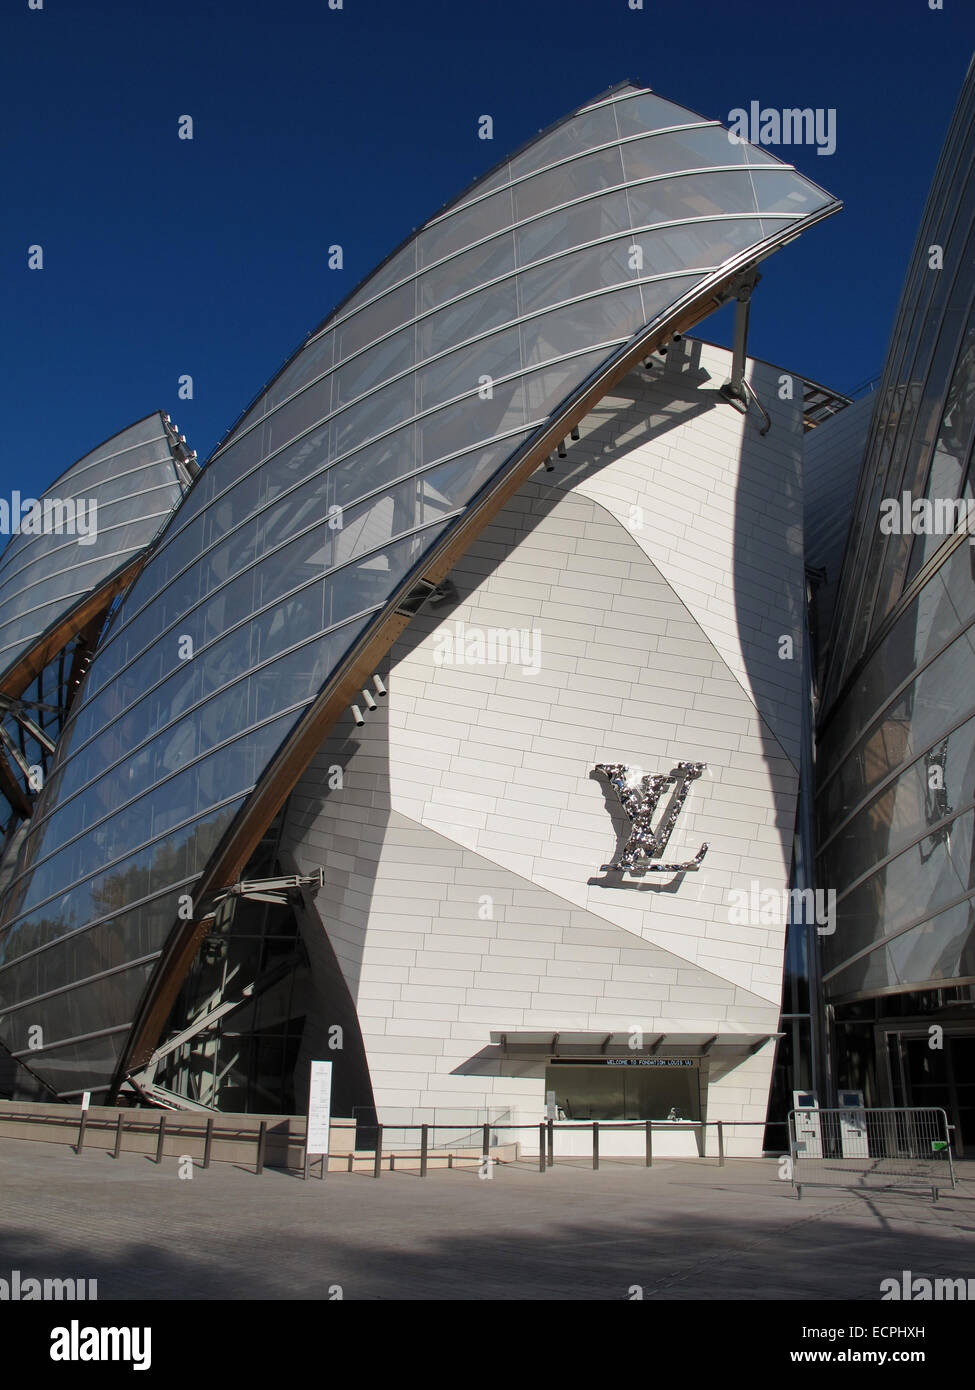 Fondation Louis Vuitton,Frank Gehry architect,Museum of contemporary Stock Photo: 76714361 - Alamy